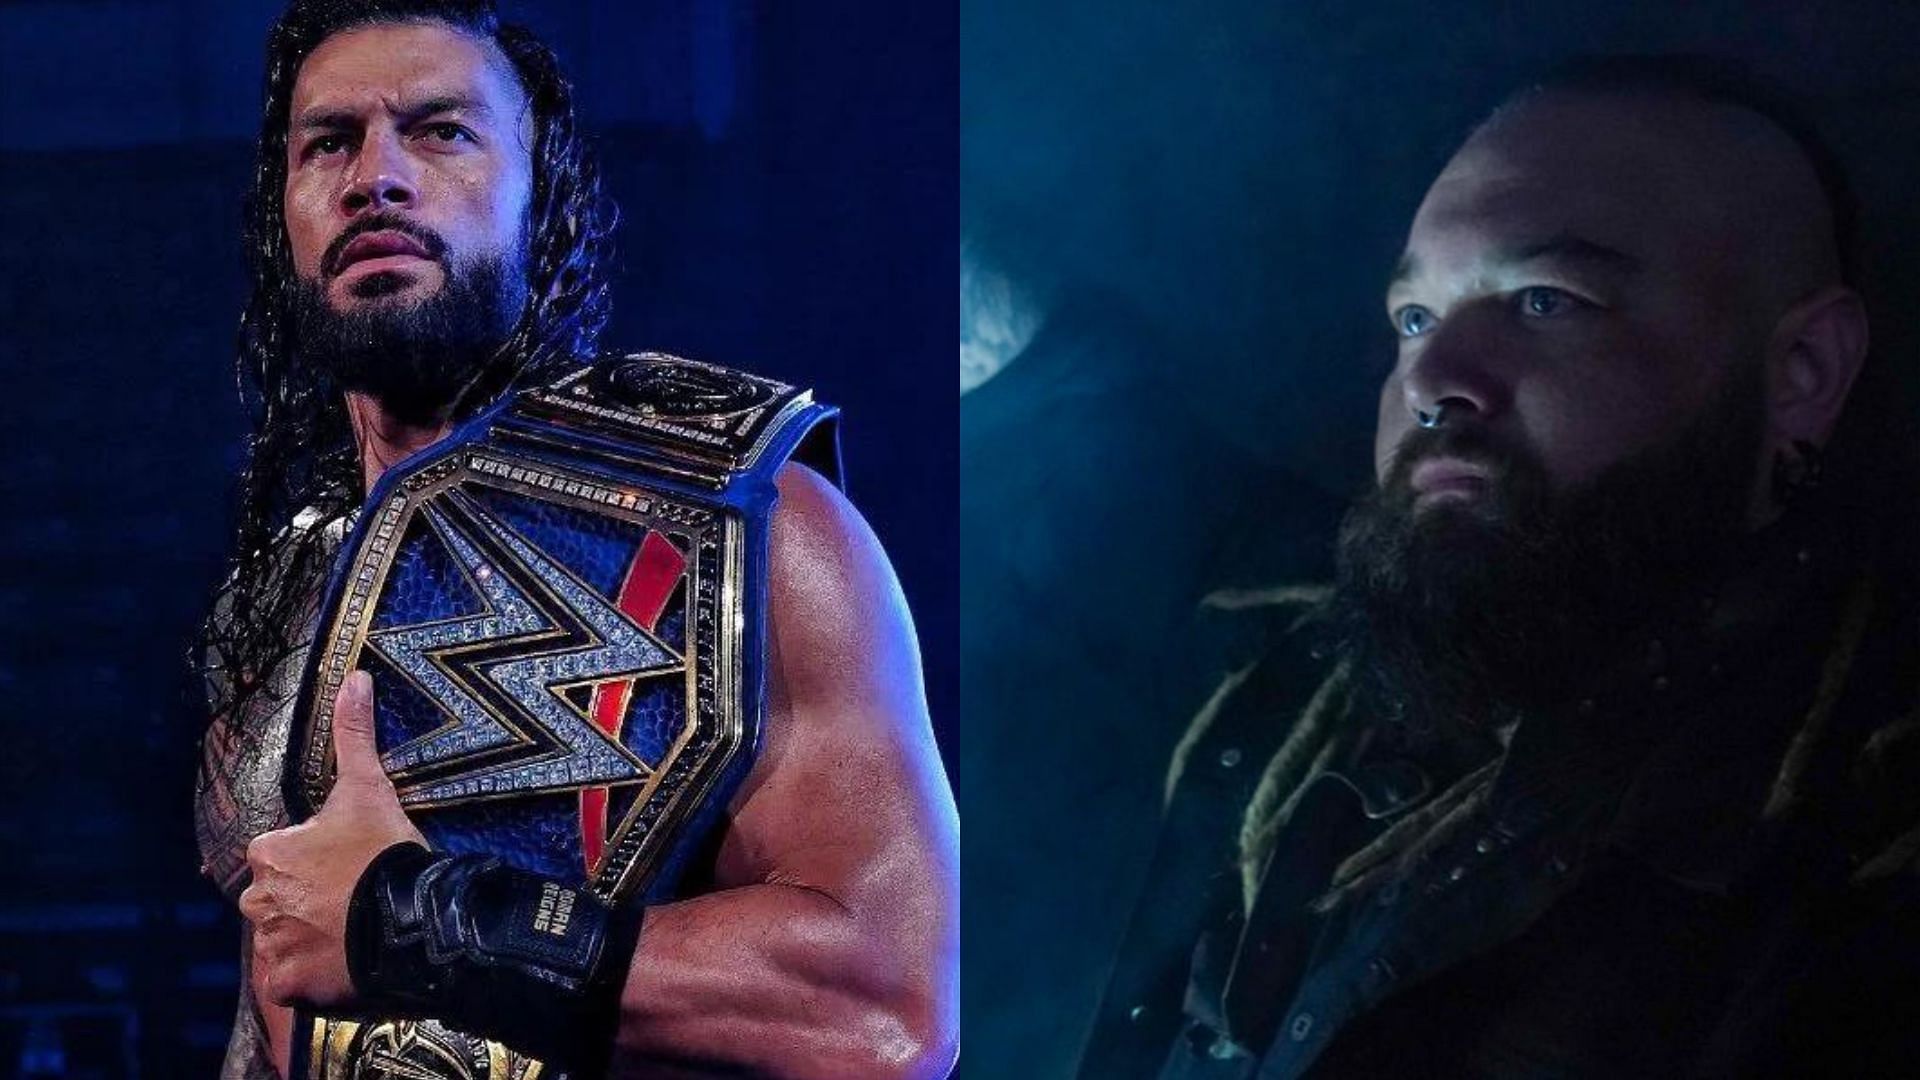 Could Bray Wyatt cross paths with Roman Reigns in the future?